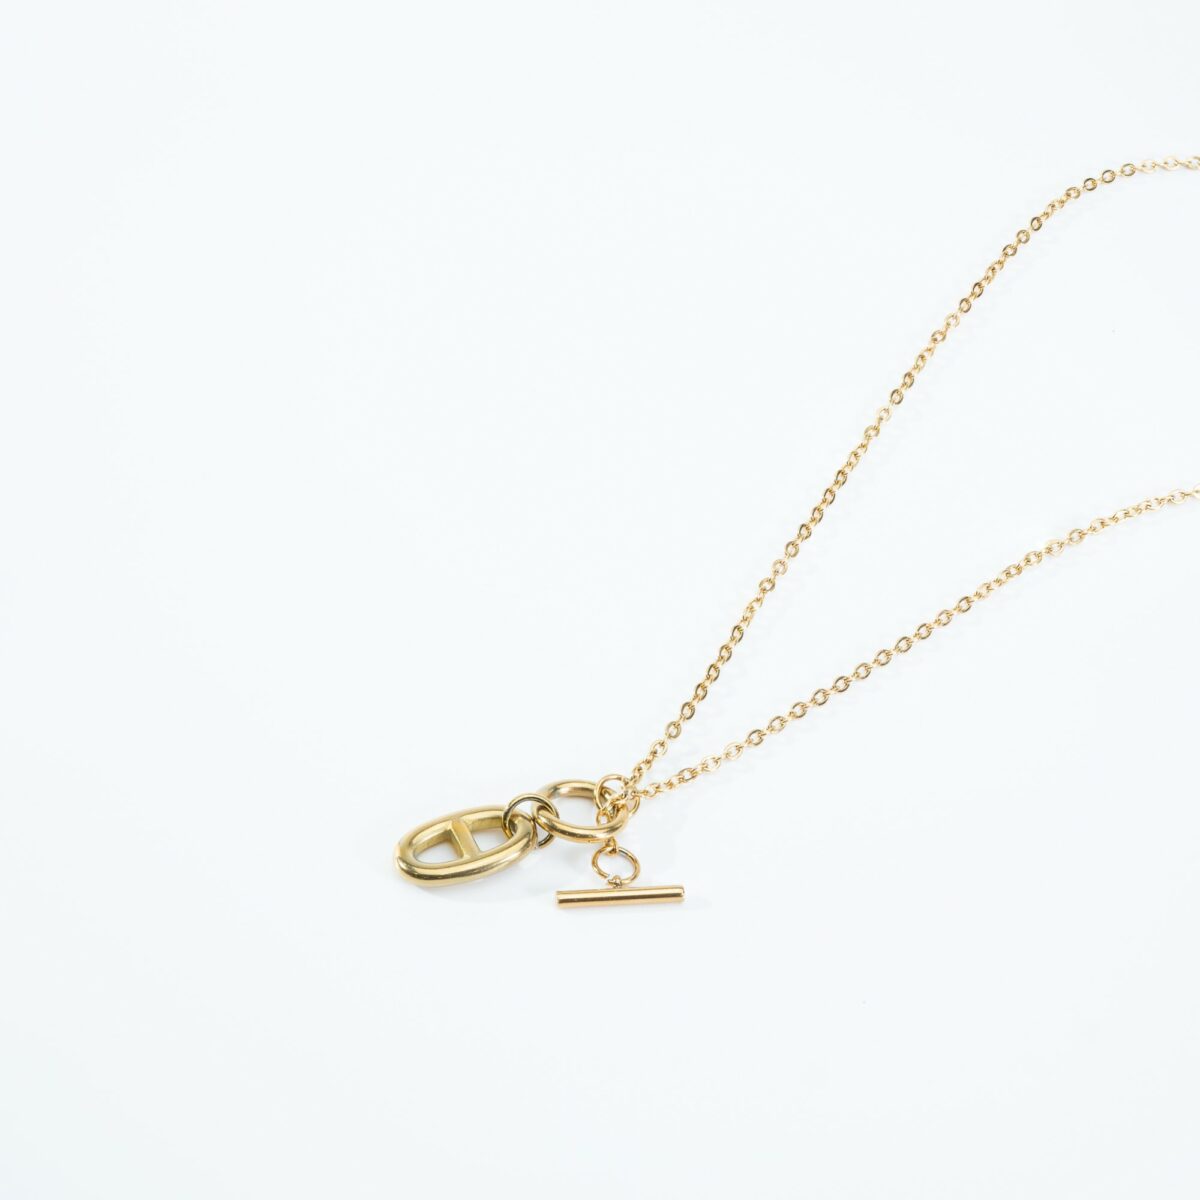 https://m.clubbella.co/product/classic-toggle-gold-necklace/ NOV-28